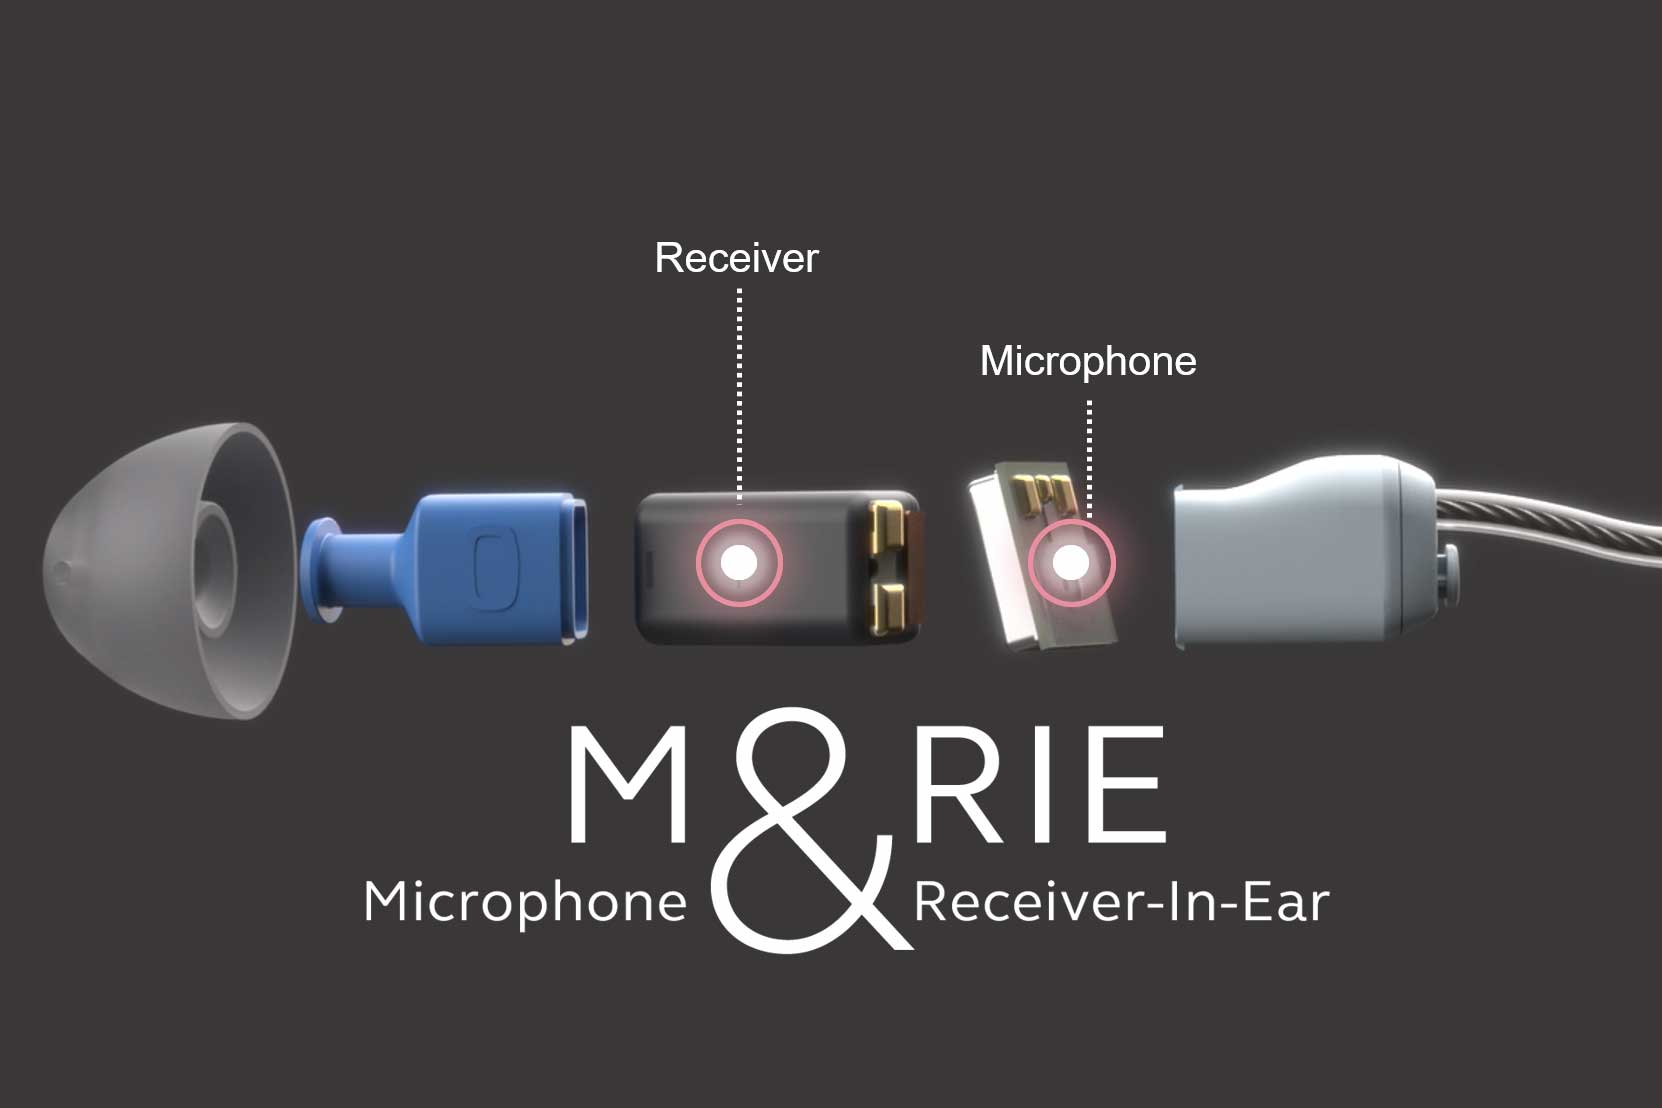 ReSound One Microphone and Receiver in Ear system